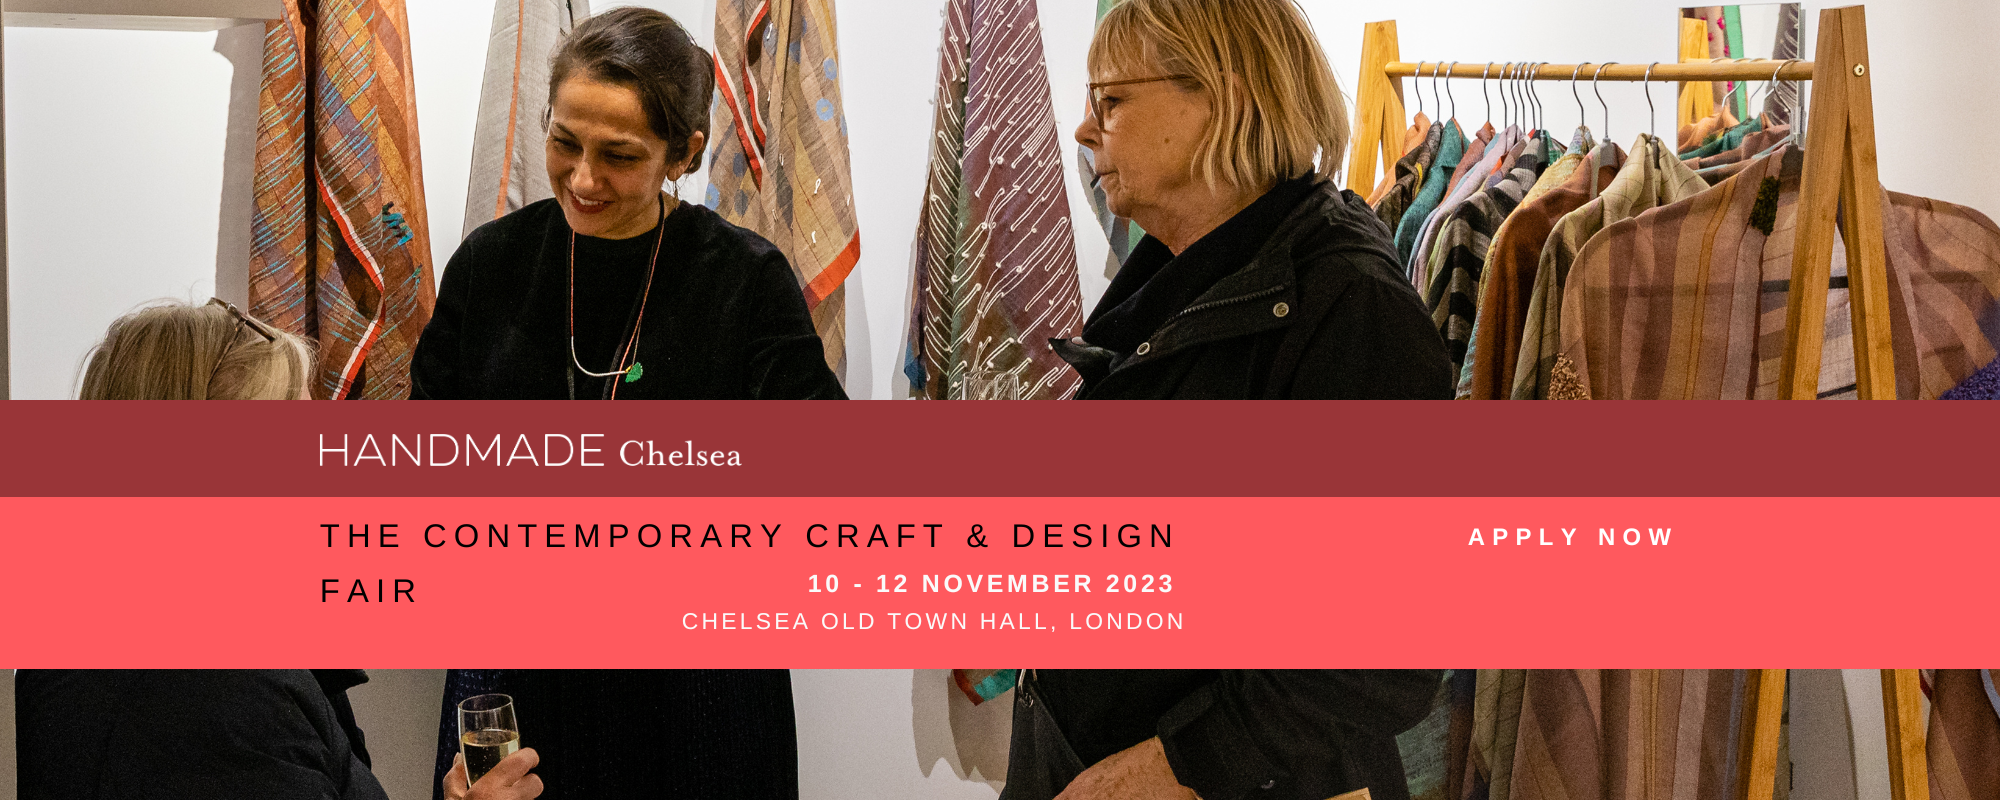 *Limited Spaces* for Handmade Chelsea in London 